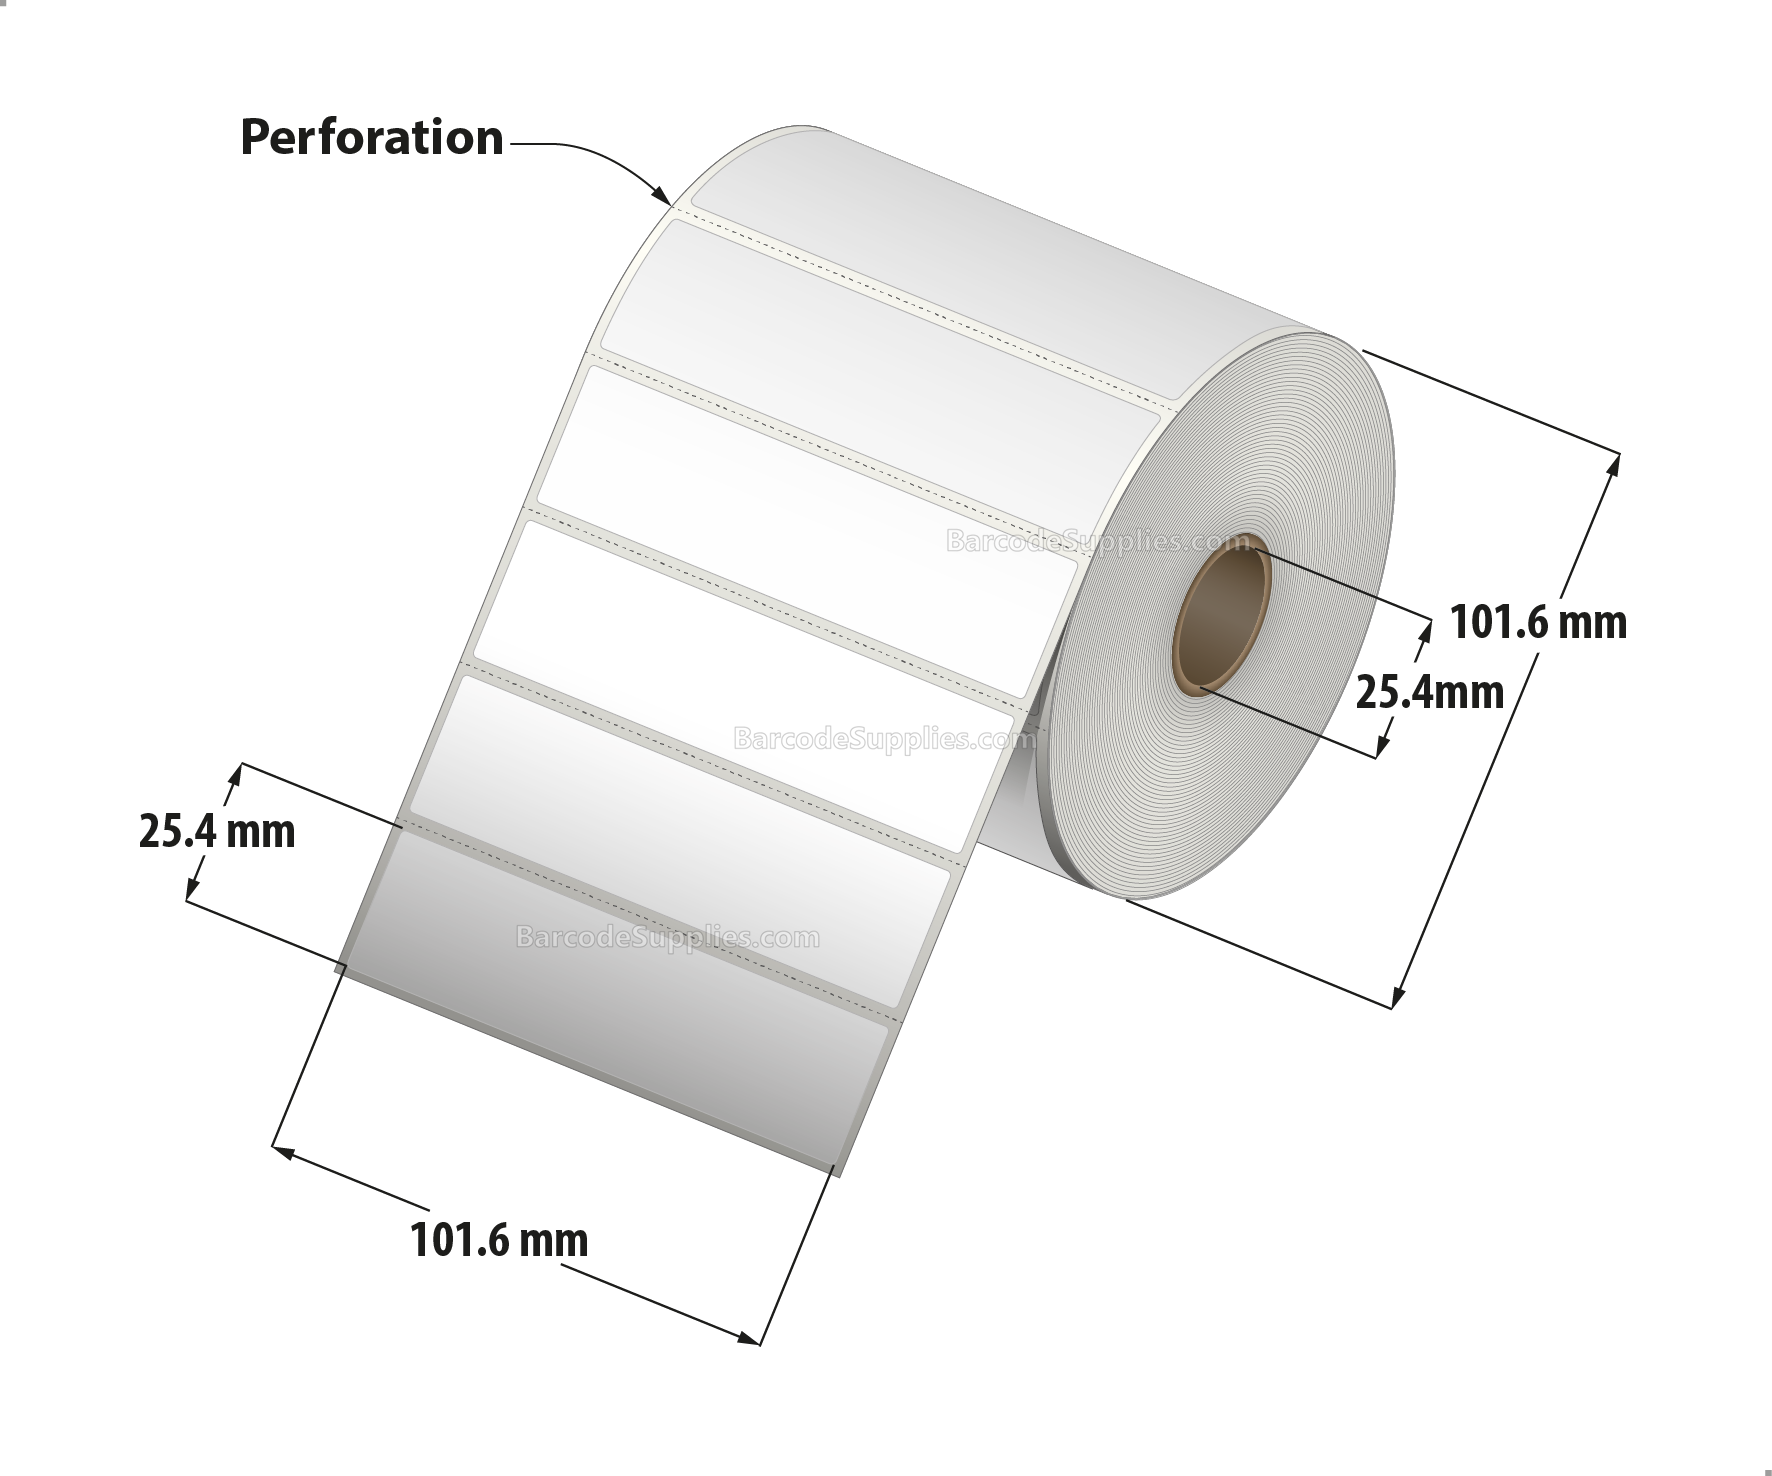 4 x 1 Direct Thermal White Labels With Permanent Acrylic Adhesive - Perforated - 1310 Labels Per Roll - Carton Of 4 Rolls - 5240 Labels Total - MPN: DT41-14PDT